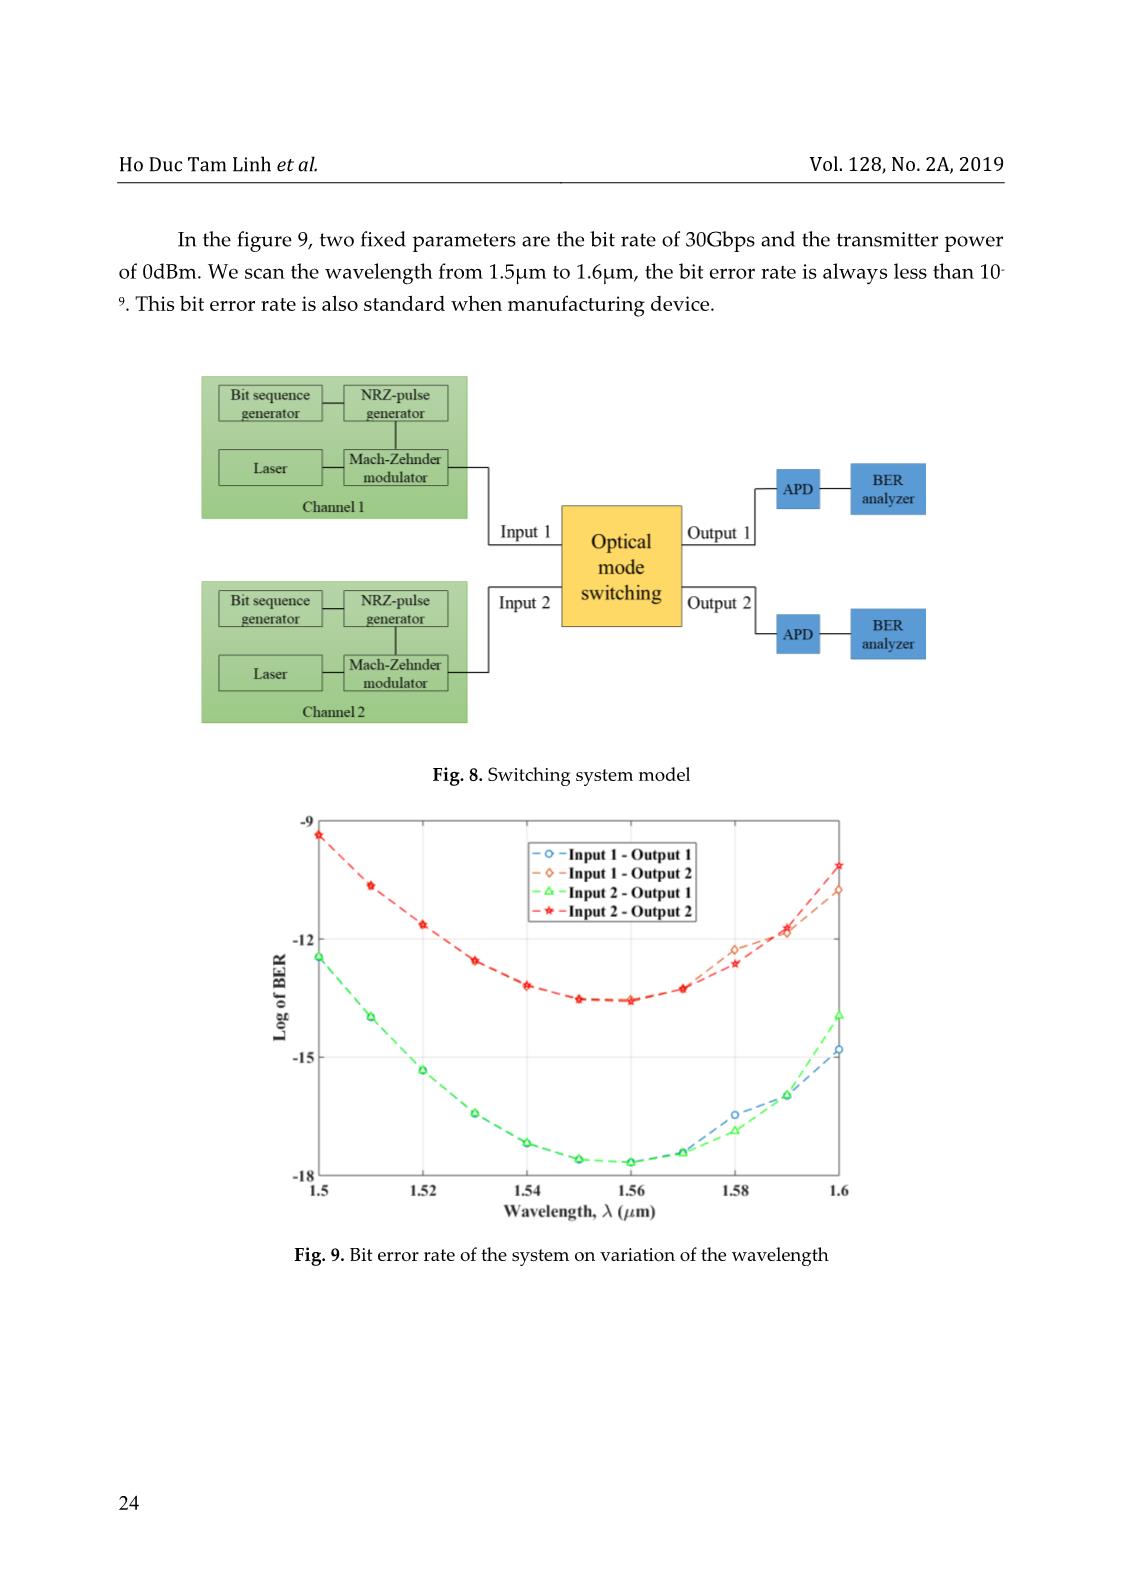 Design a 2x2 compact mode switching using multimode interference based on silicon material trang 8